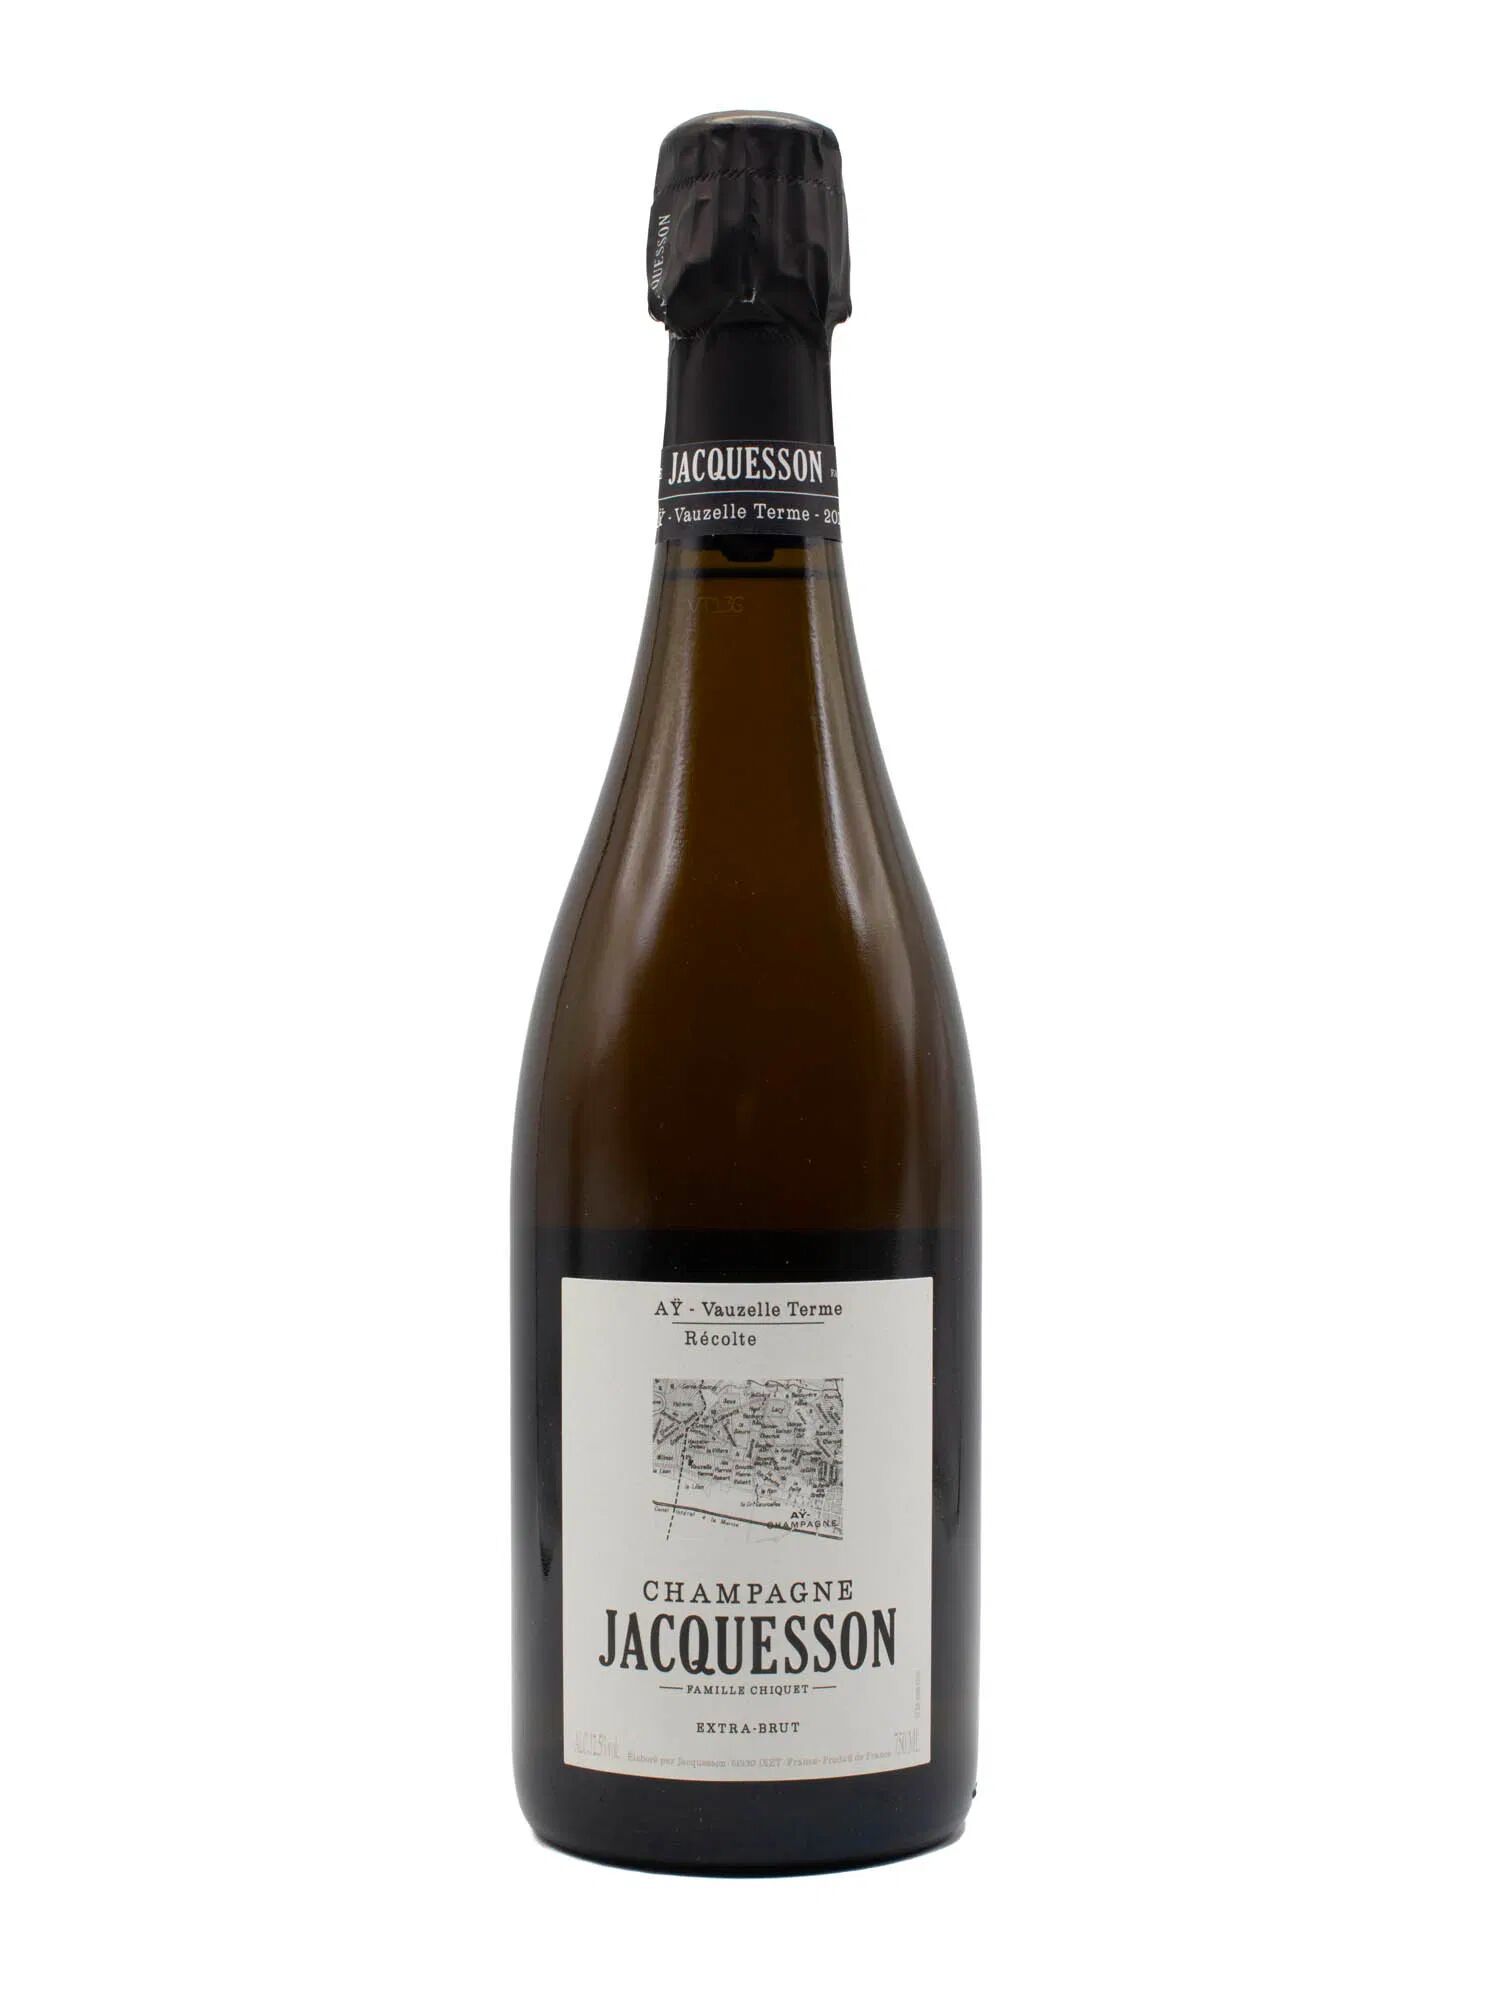 Champagne Jacquesson Ay Vauzelle Terme 2013 Extra Brut